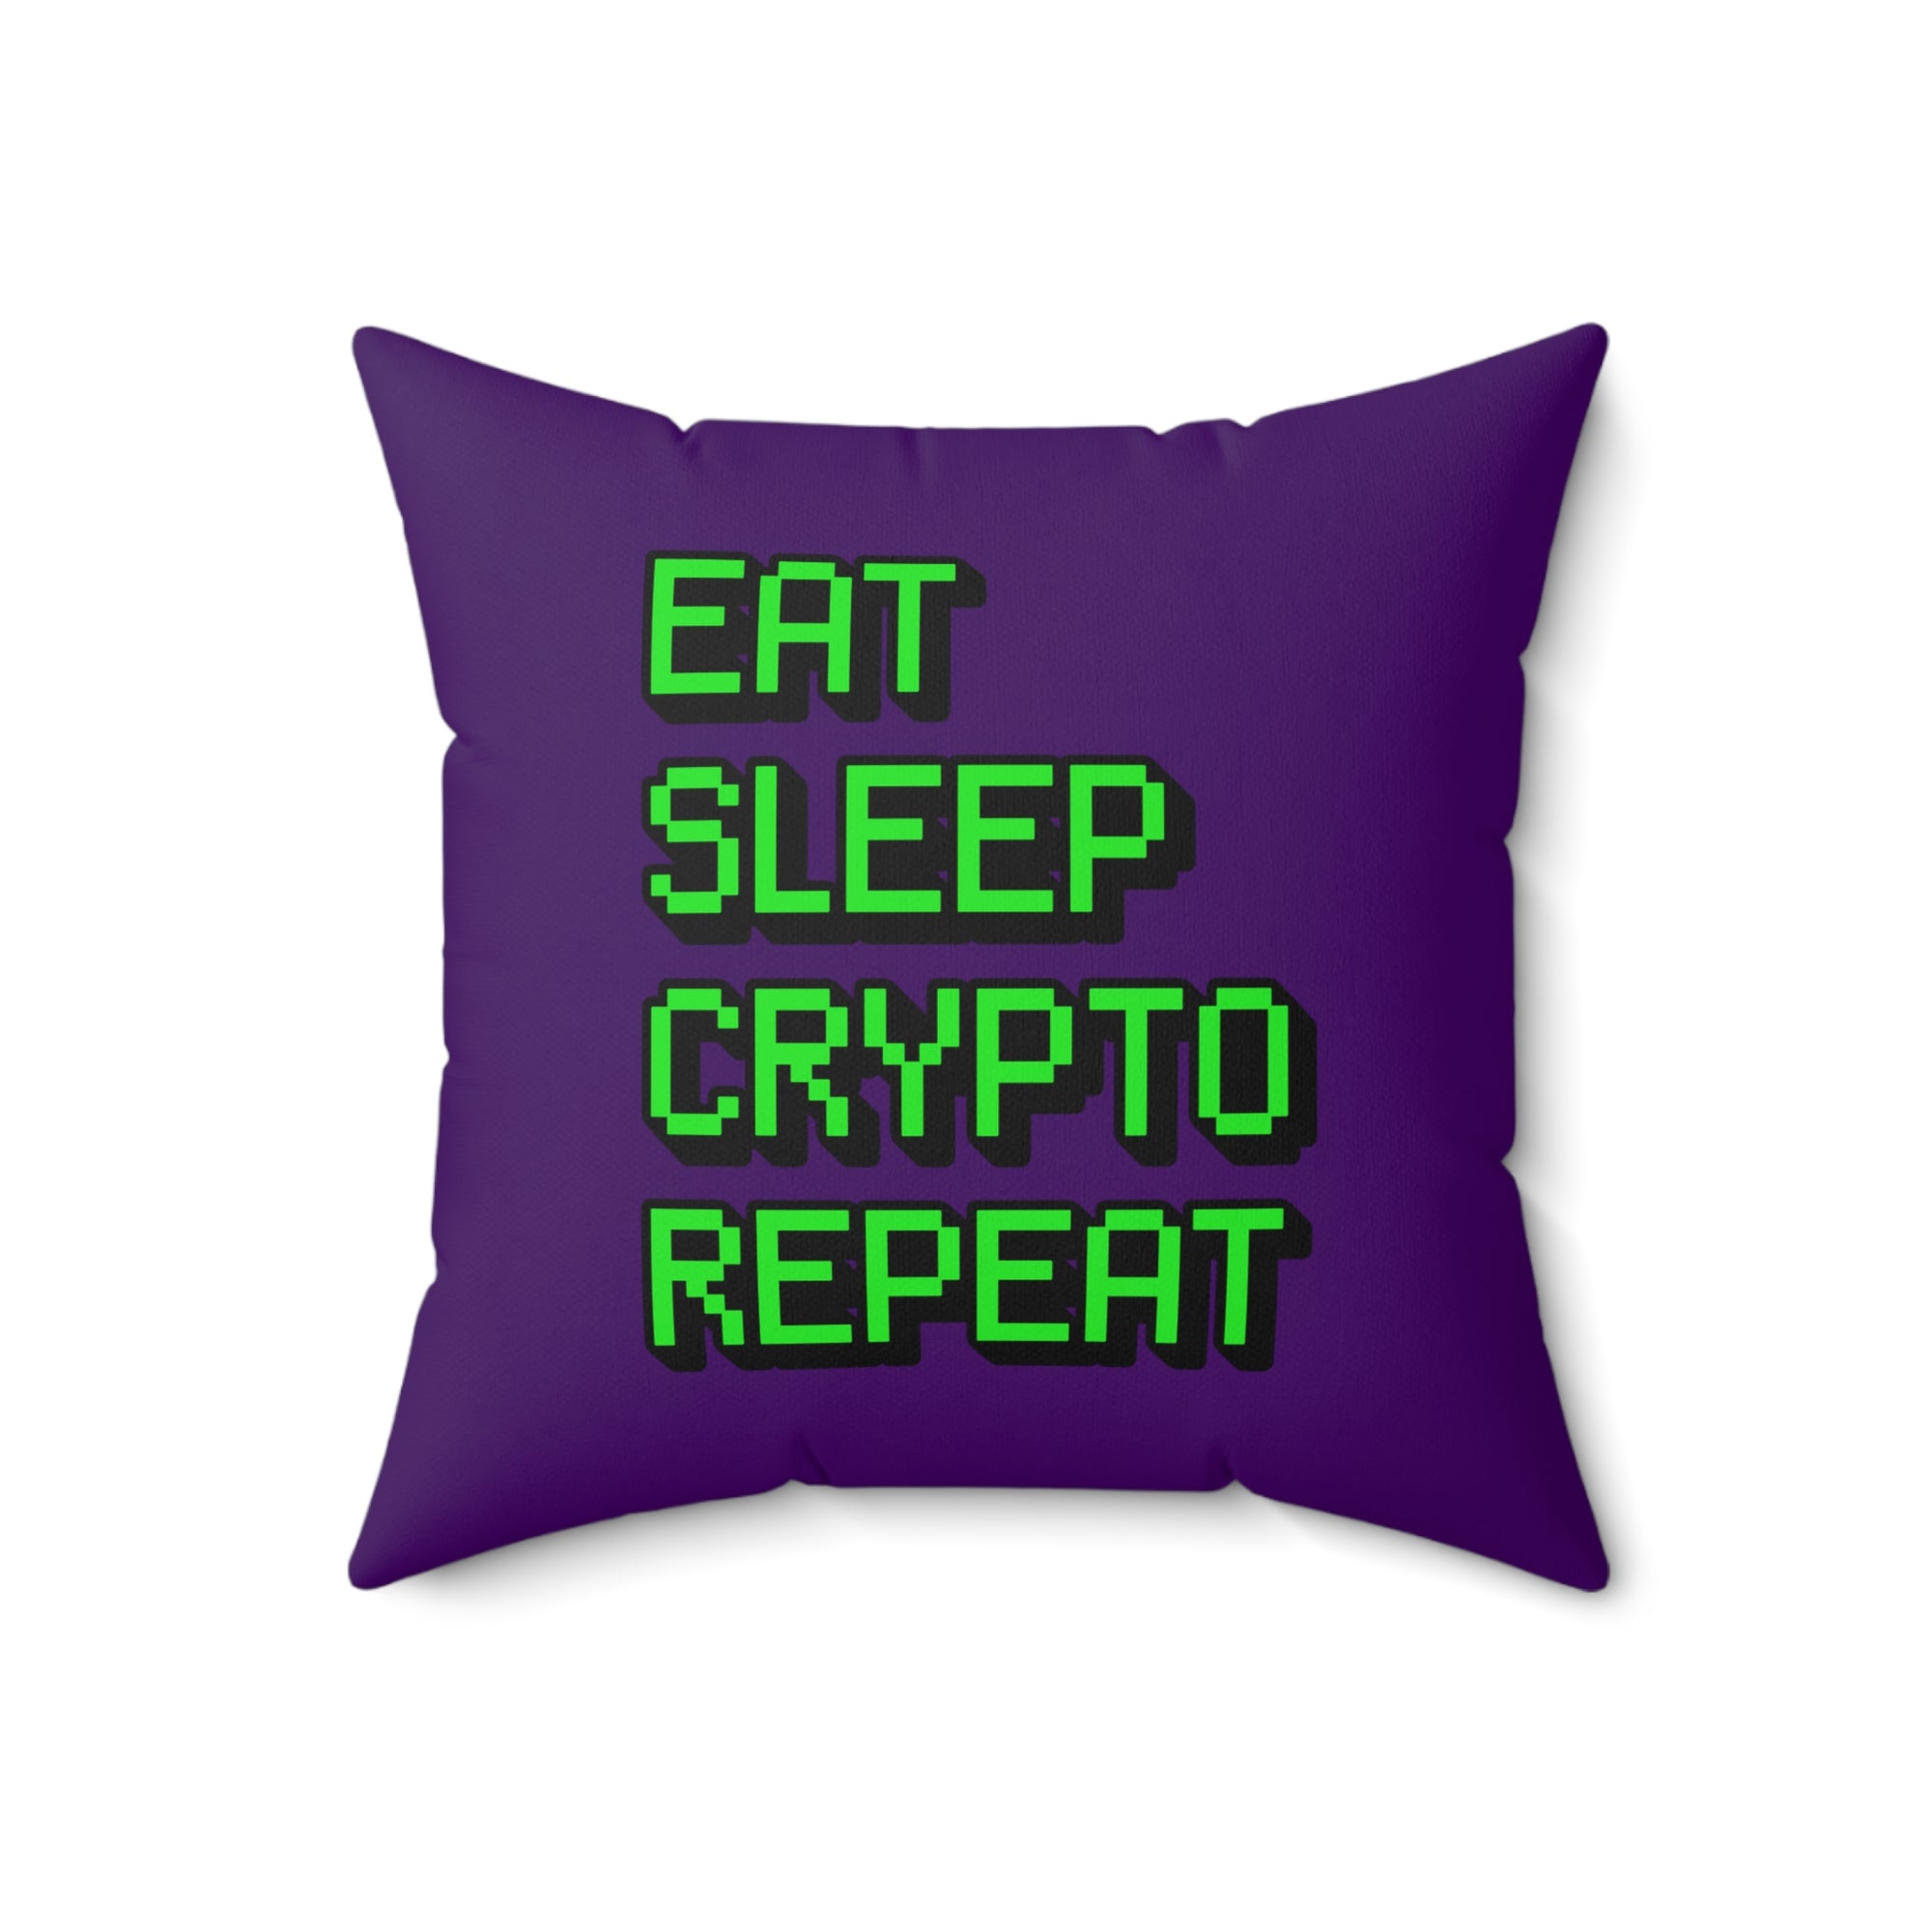 Cryptocurrency Gift Ideas - Eat Sleep Crypto Repeat Pillow. Close Up View.